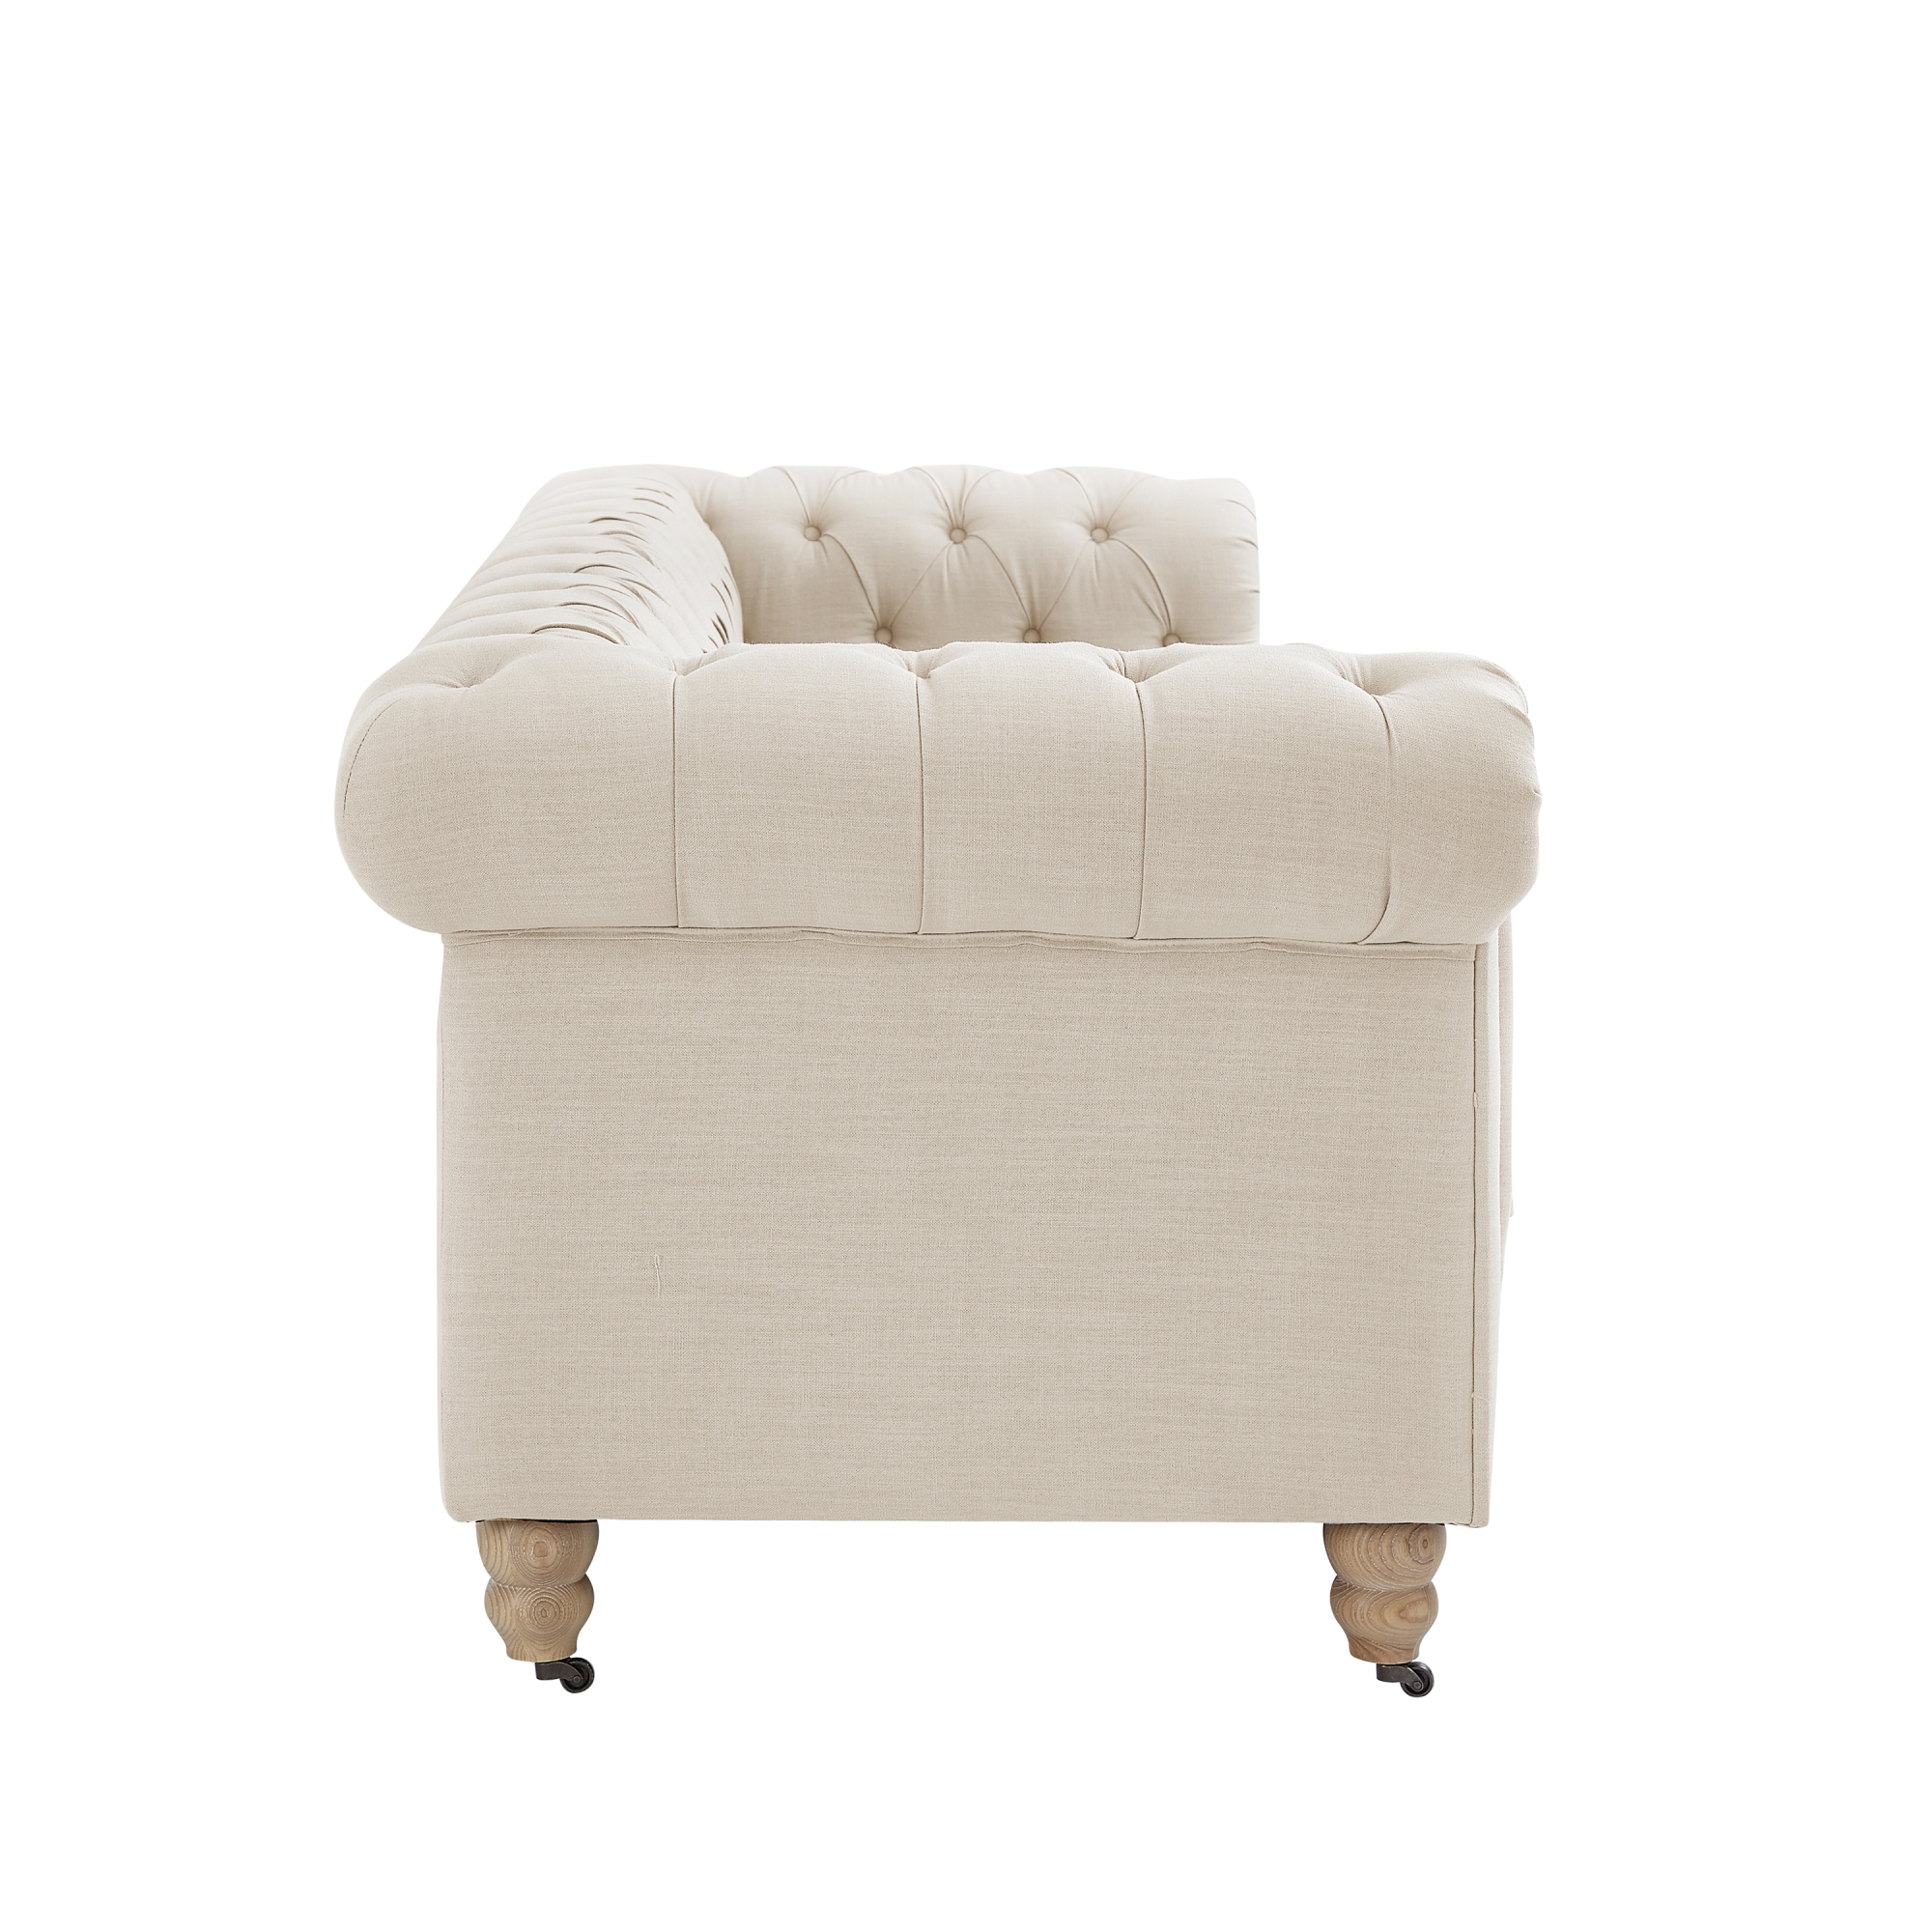 Rustic Manor Macey Chesterfield Sofa Button Tufted Rolled Arm, Sinuous Springs Round Bun Leg with Caster, Removable Seat Cushion